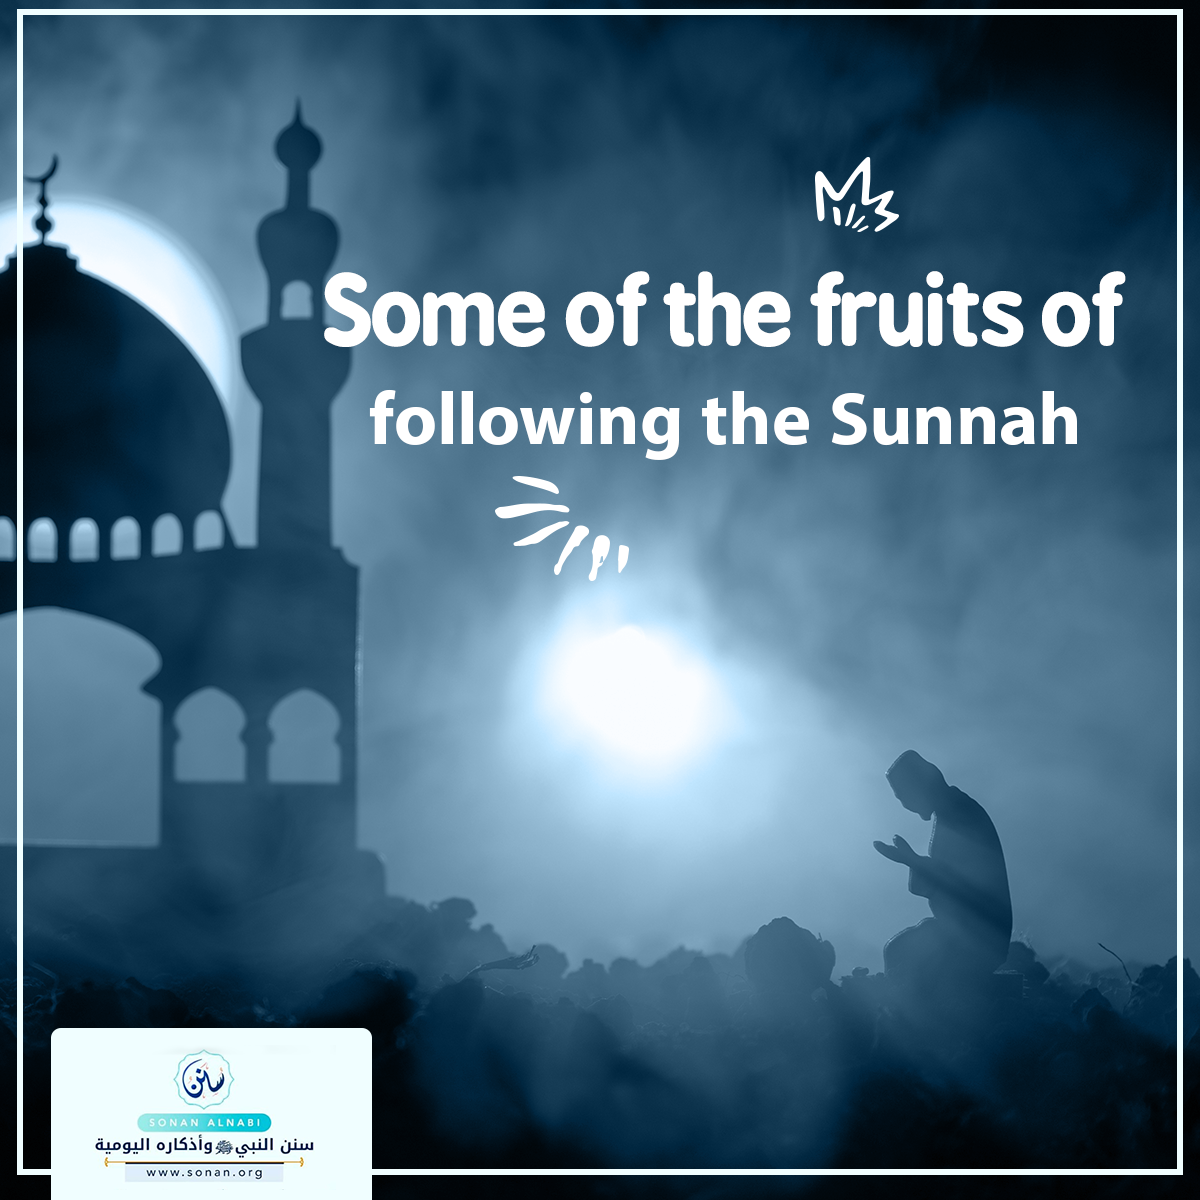 Some of the fruits of following the Sunnah: